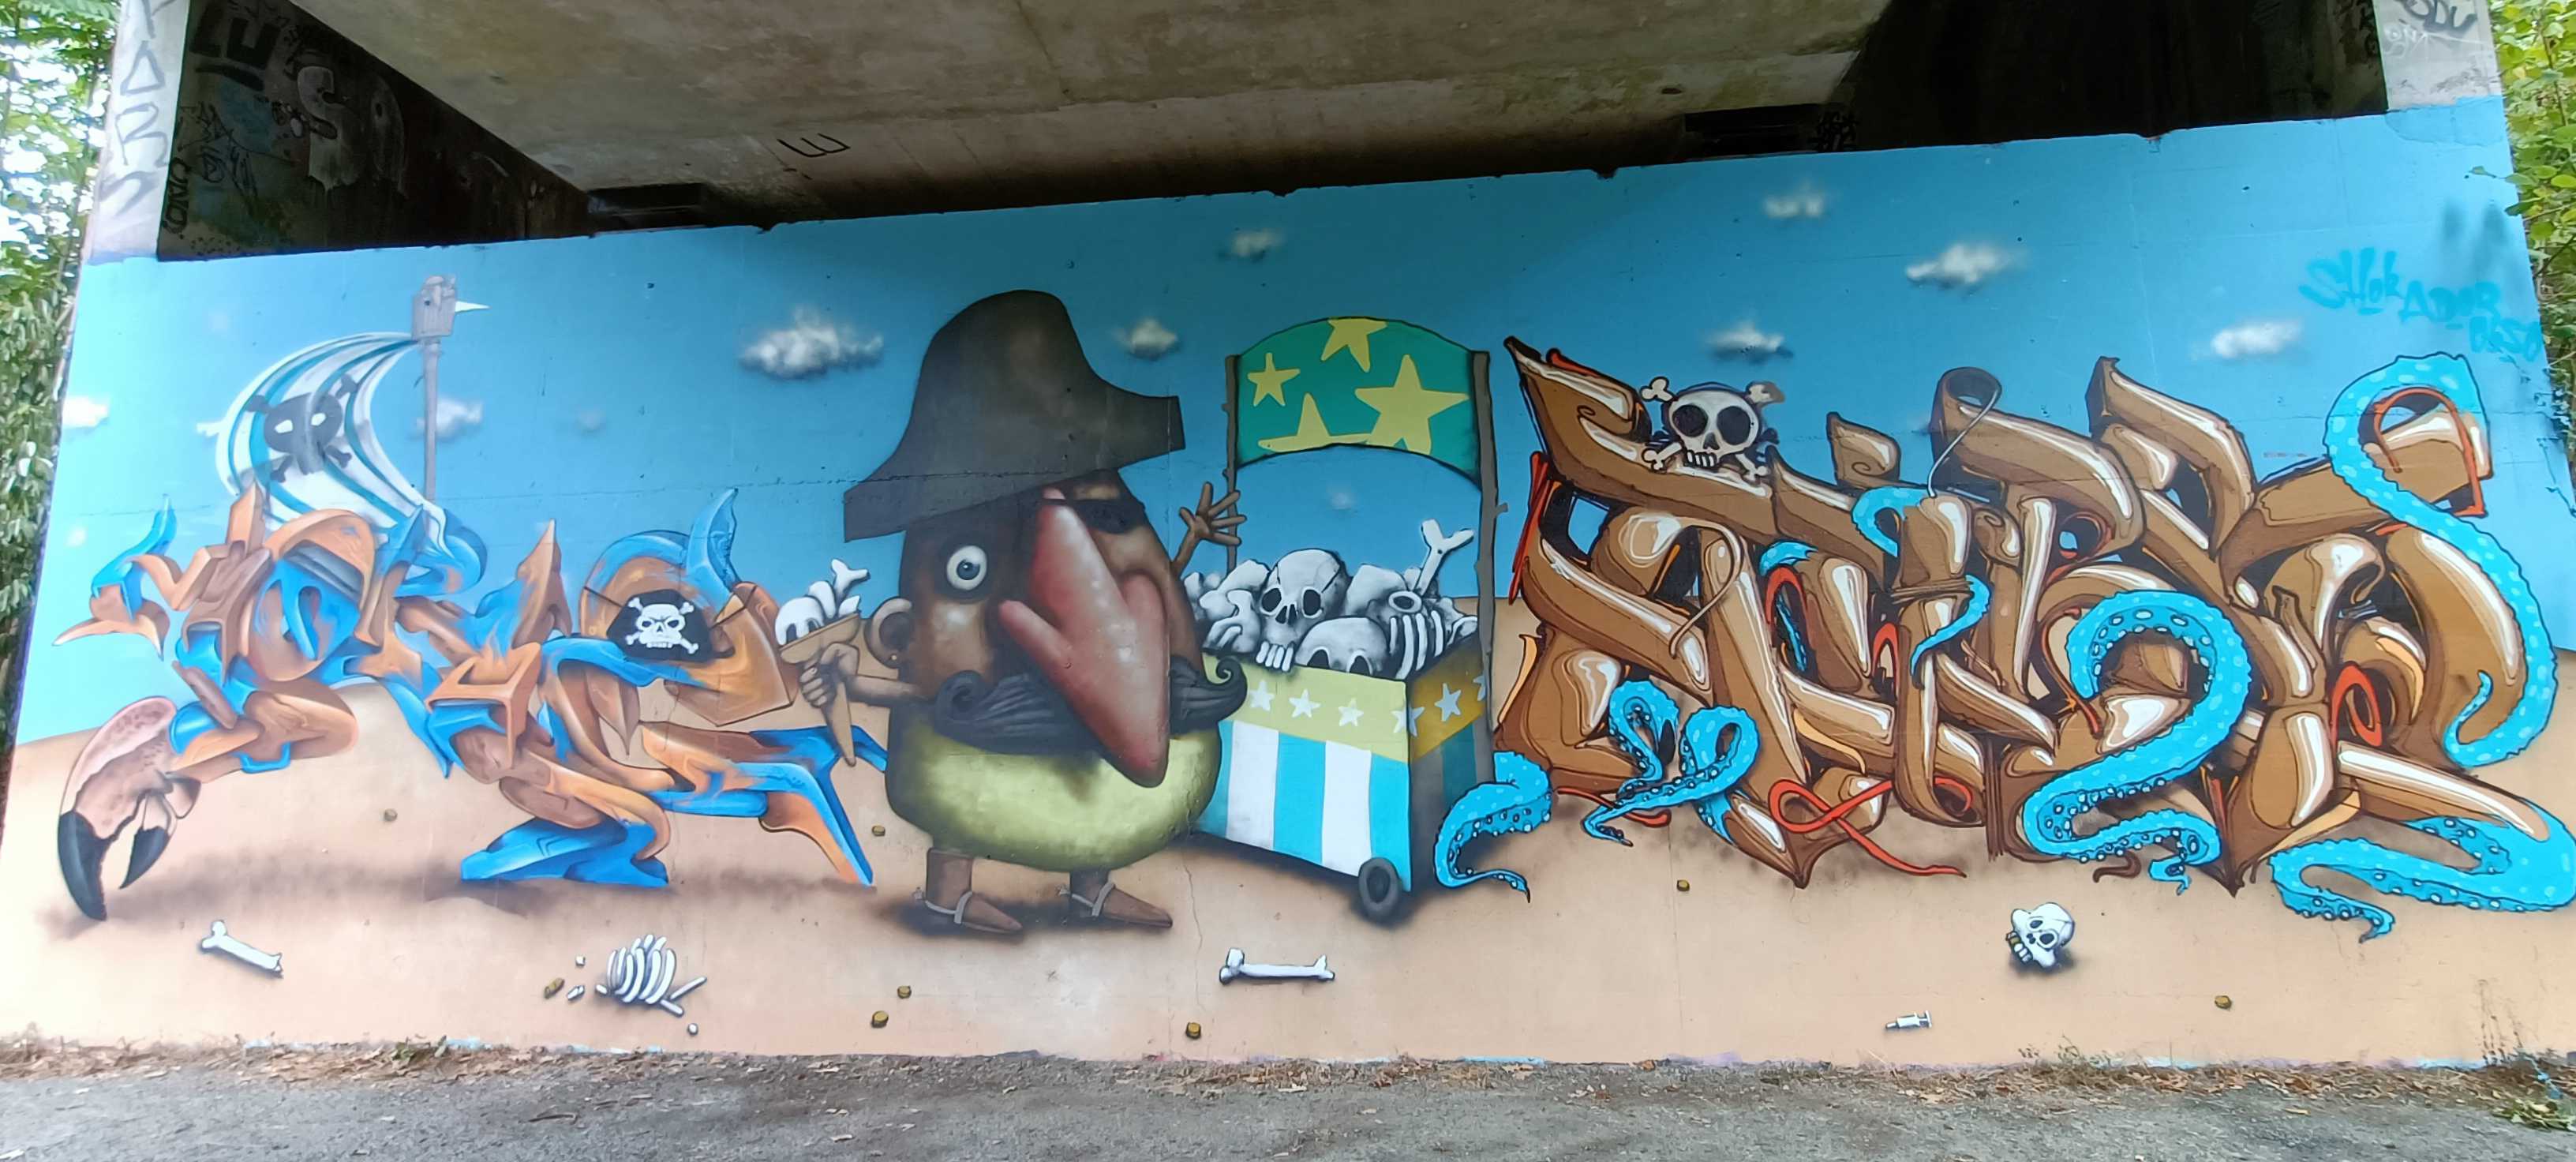 Graffiti 5870  by the artist Ador captured by Rabot in Rezé France